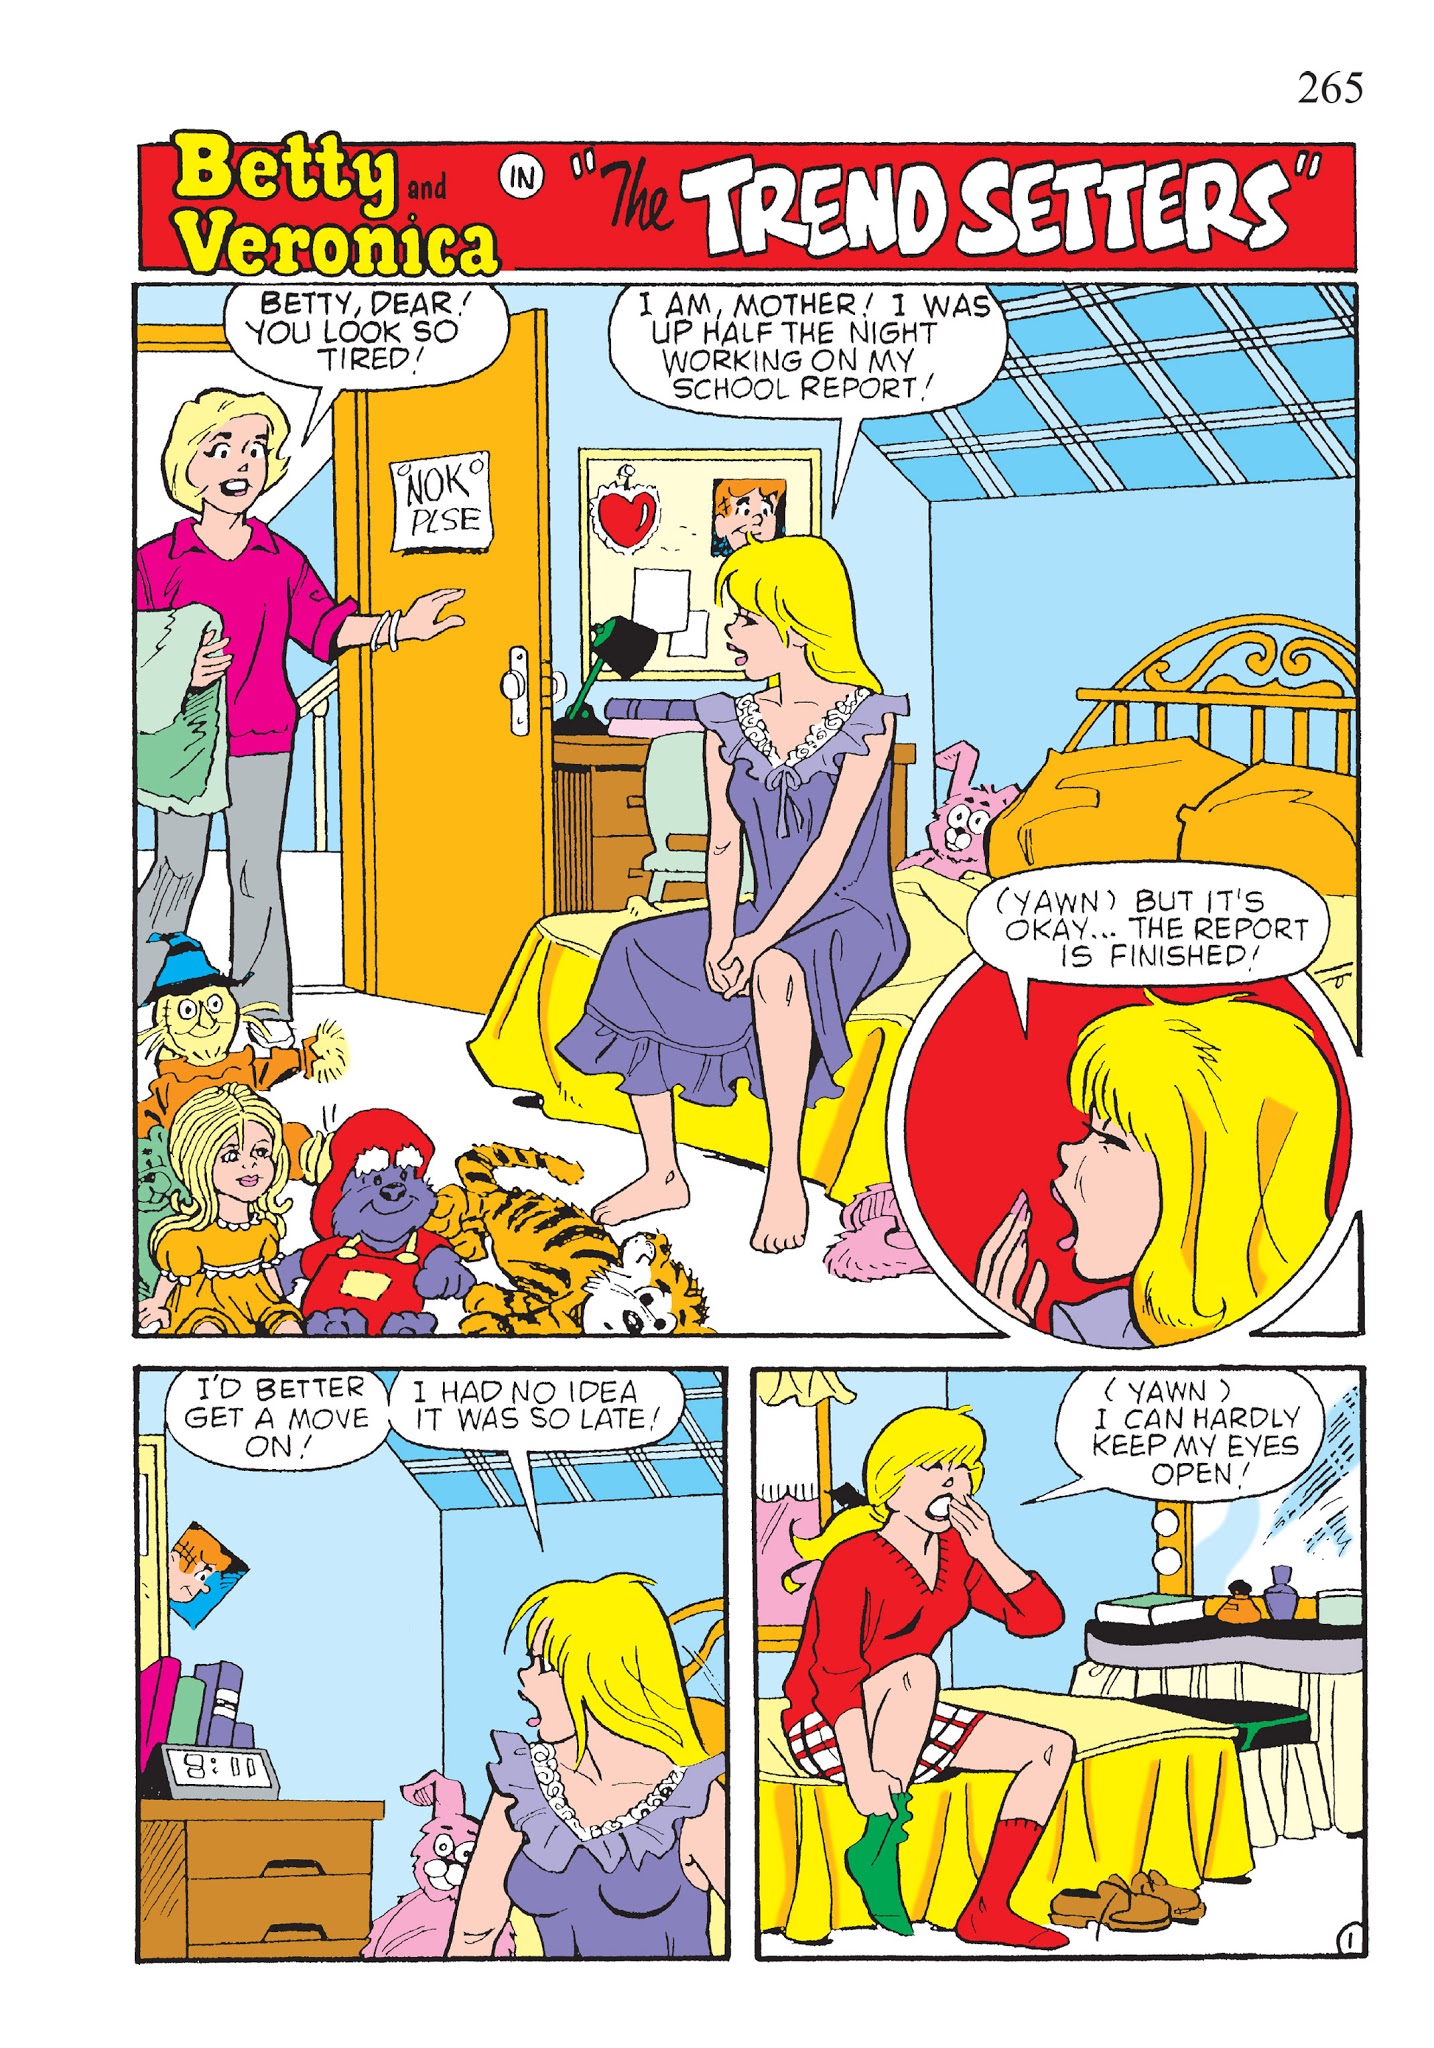 Read online The Best of Archie Comics: Betty & Veronica comic -  Issue # TPB - 266